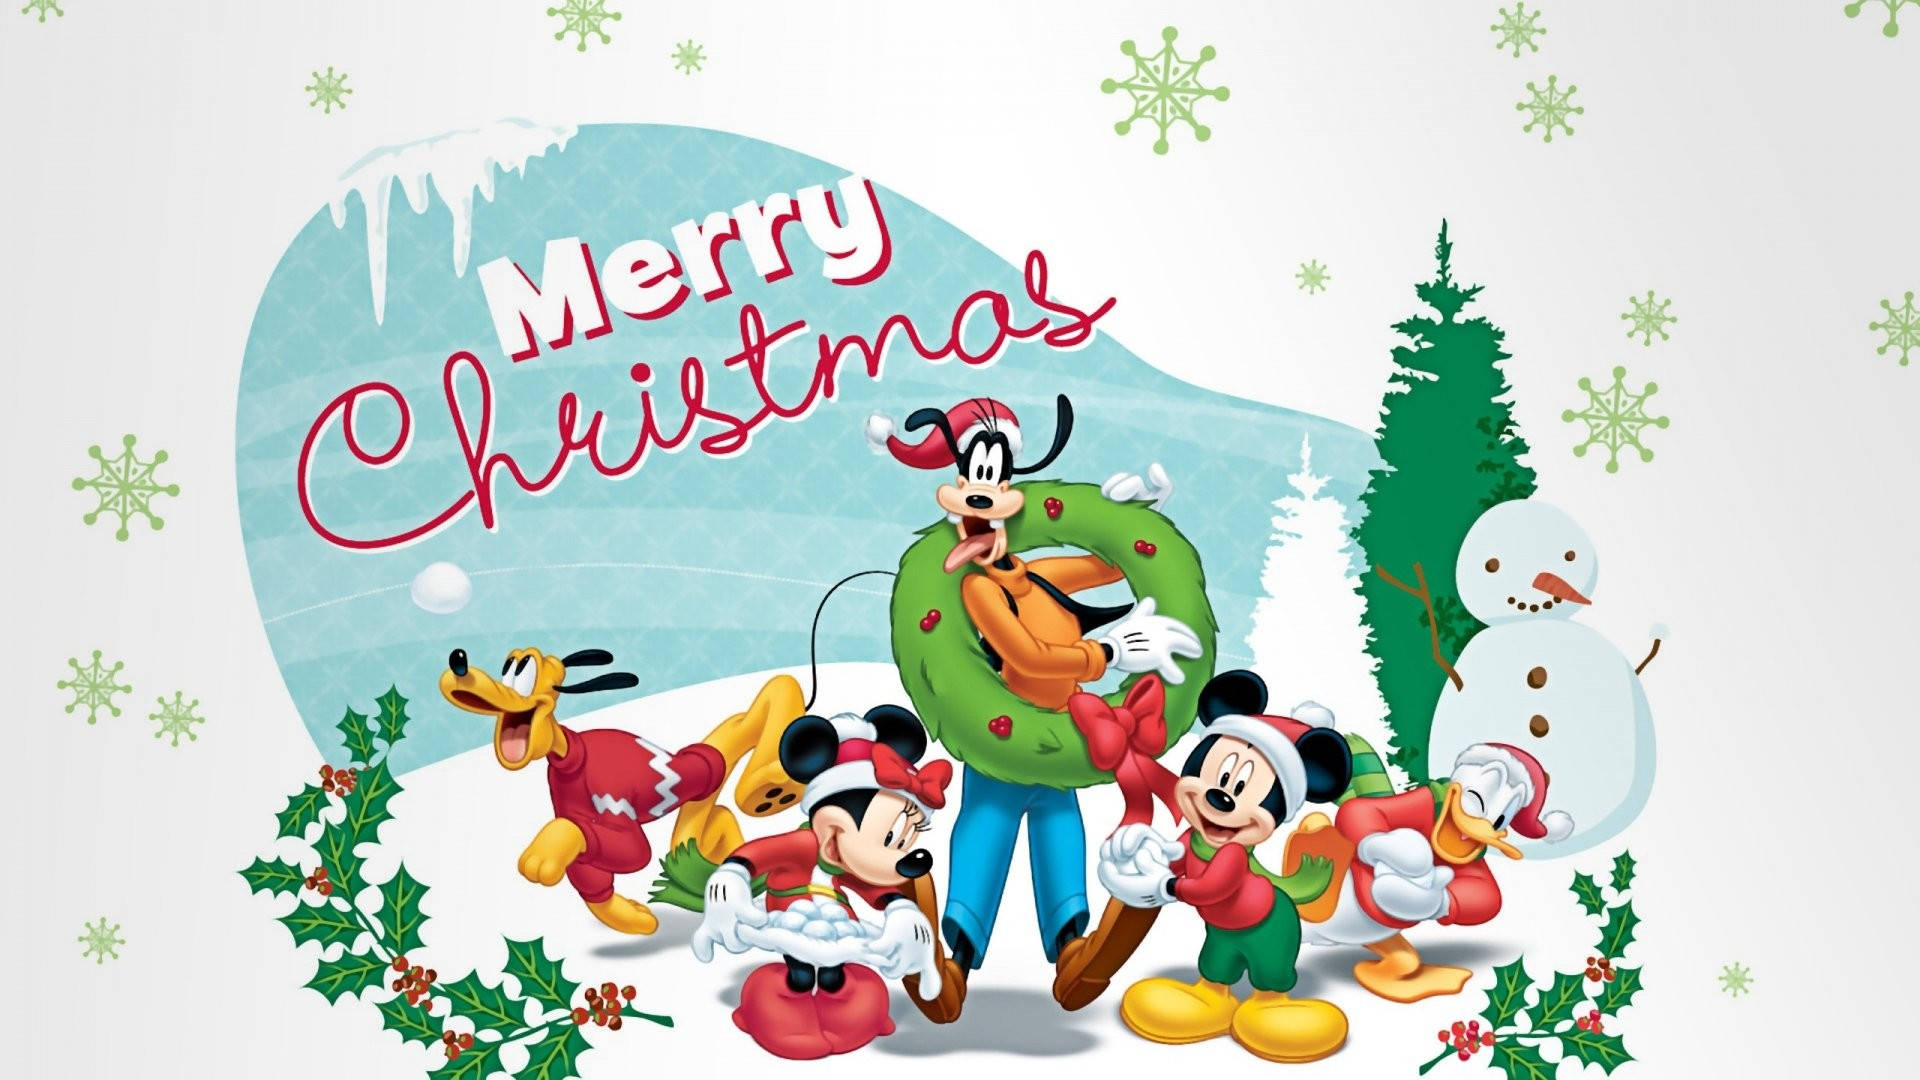 Funny Christmas Poster With Mickey Mouse